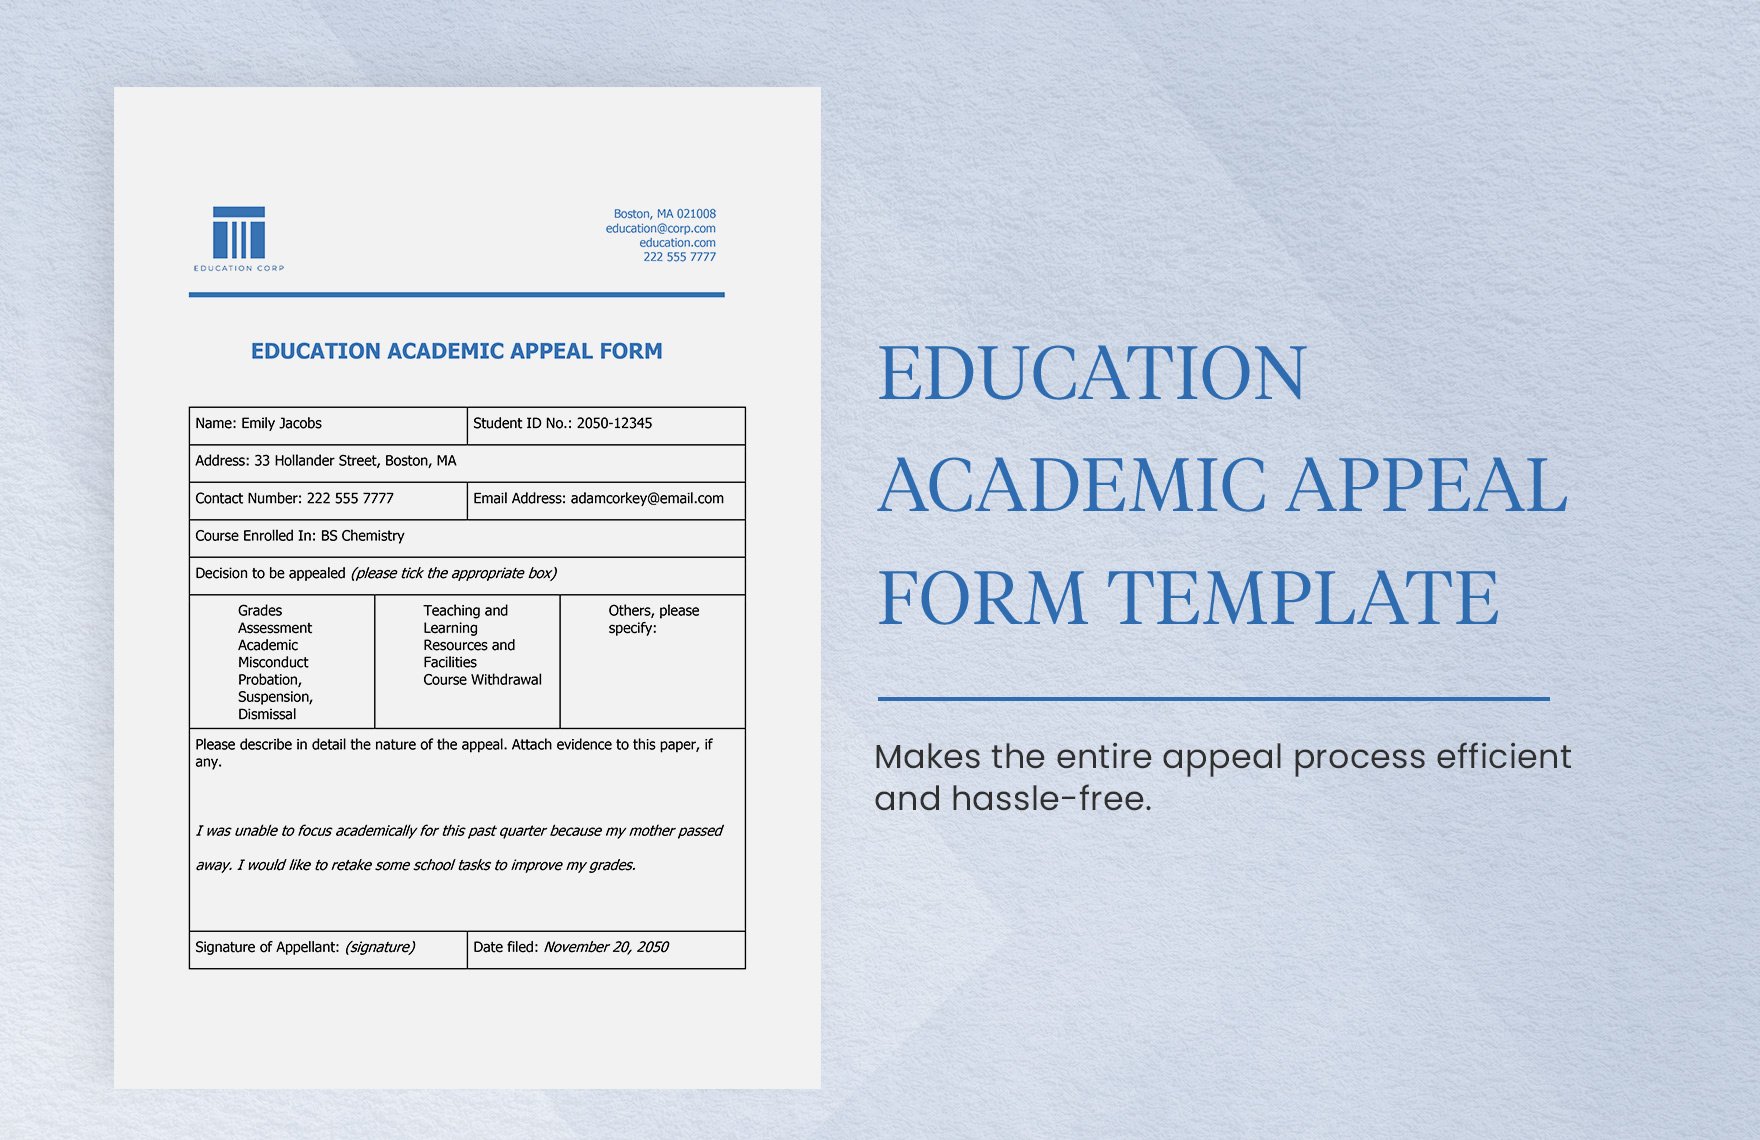 Education Academic Appeal Form Template in Word, Google Docs